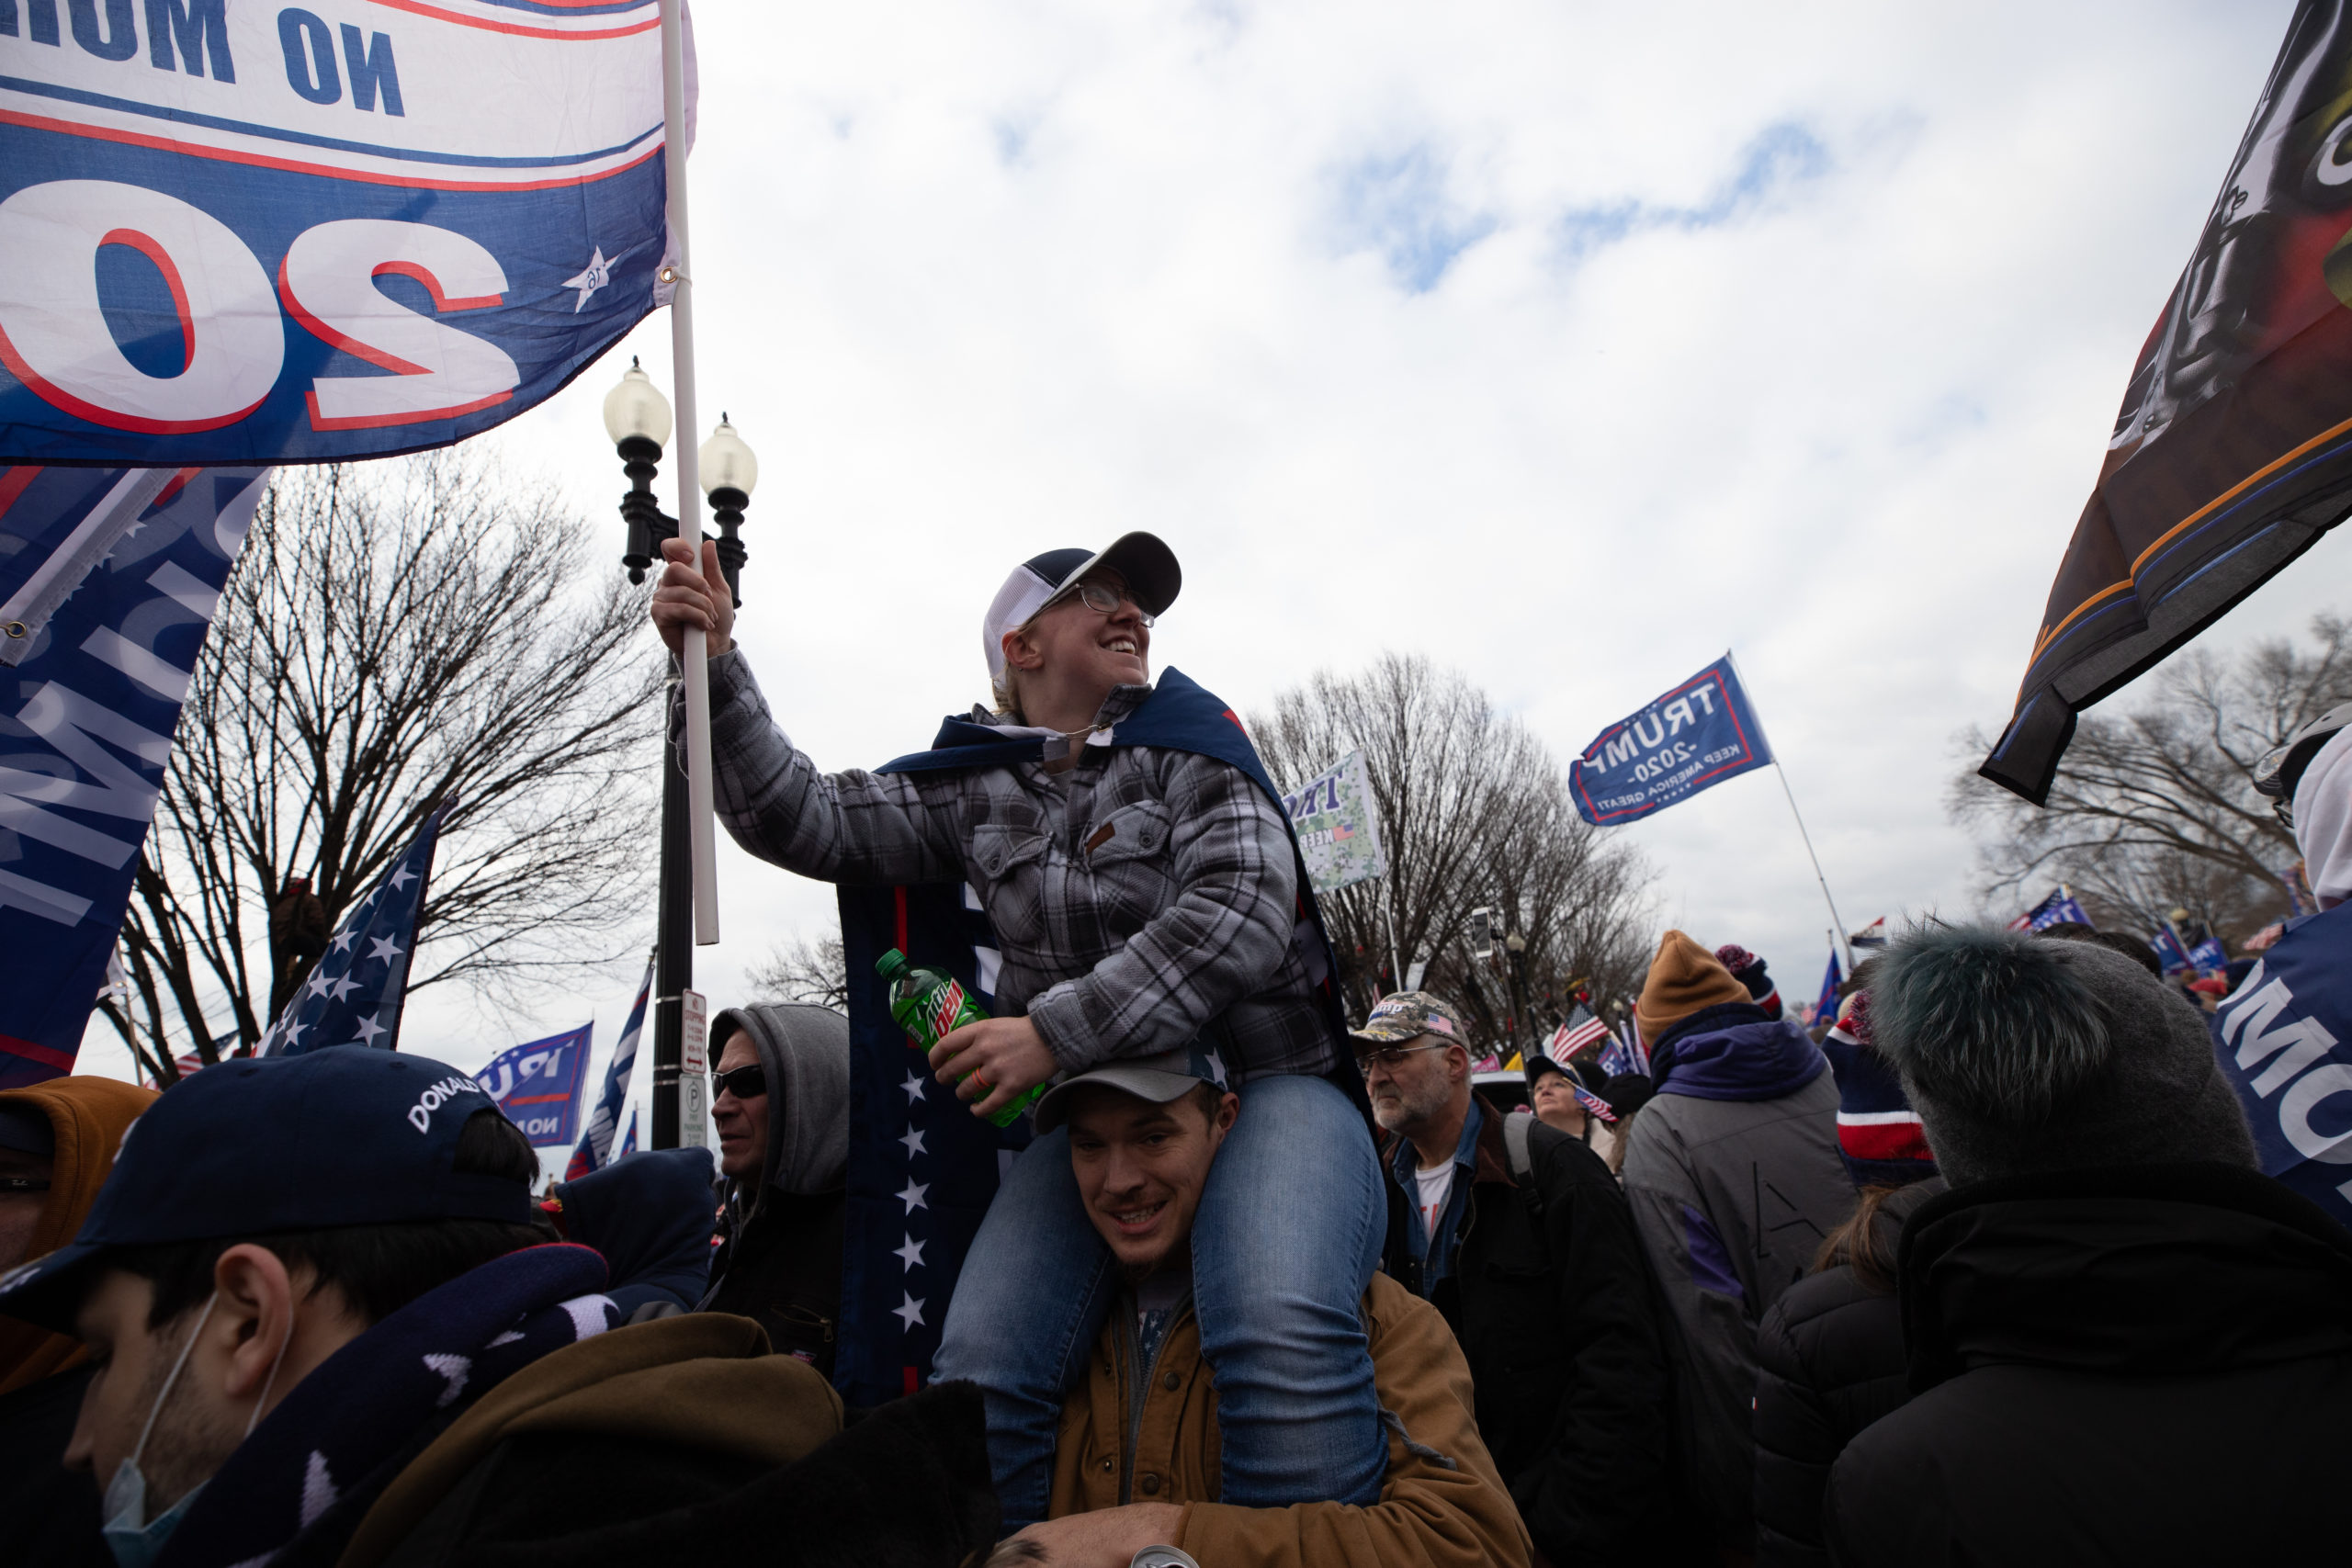 Trump supporters move through an extremely congested Constitution Ave NW in Washington, D.C. on Jan. 6, 2021. (Kaylee Greenlee - Daily Caller News Foundation)